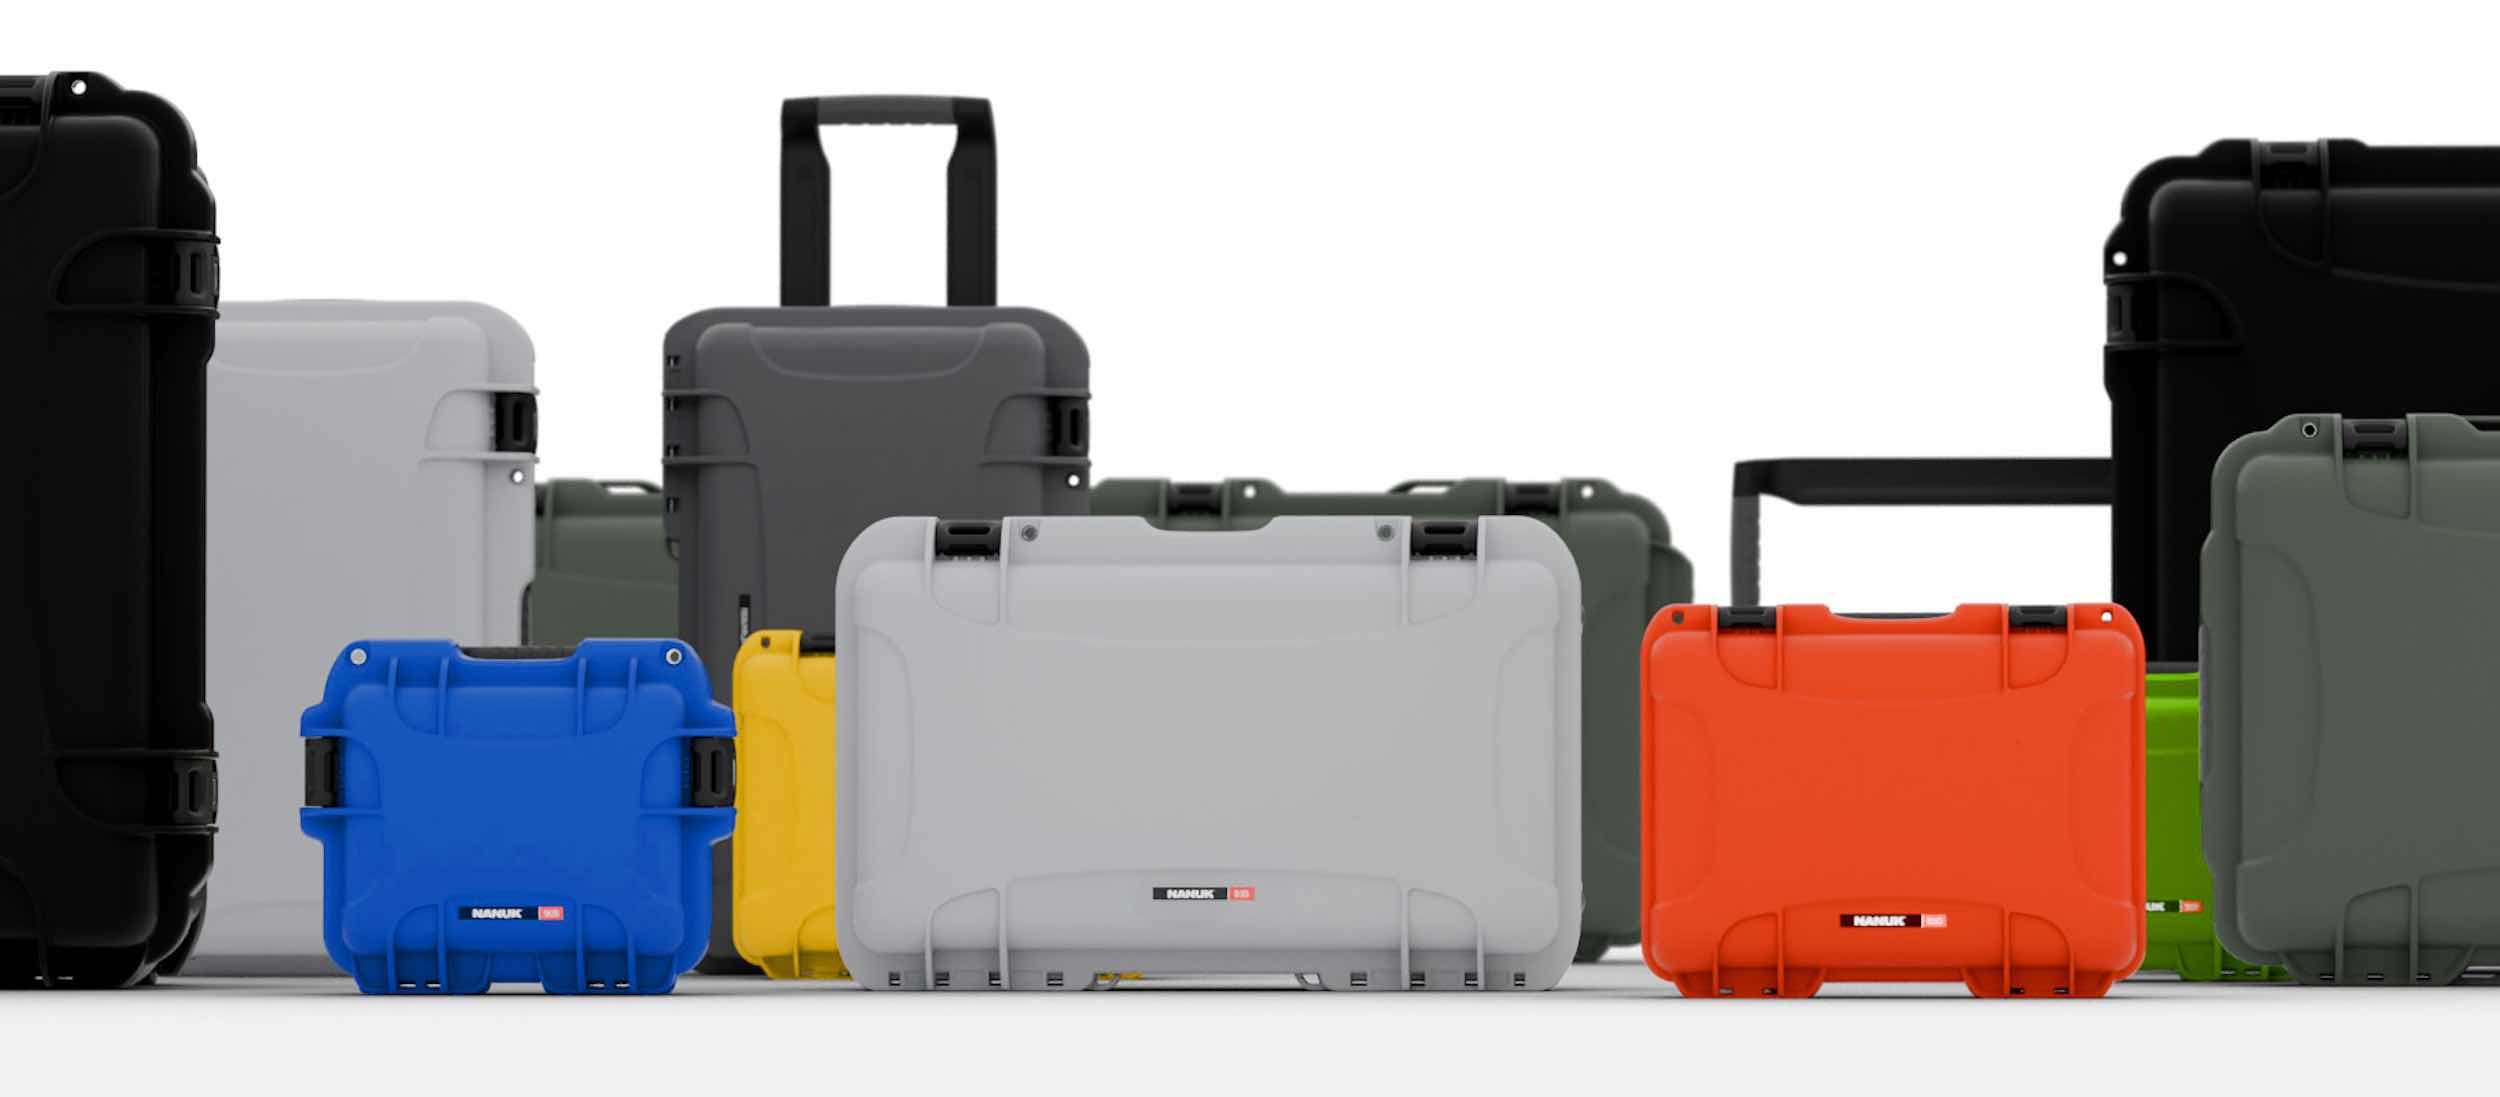 Various sizes and colors of NANUK hard cases lined up, demonstrating versatile and durable gear protection solutions